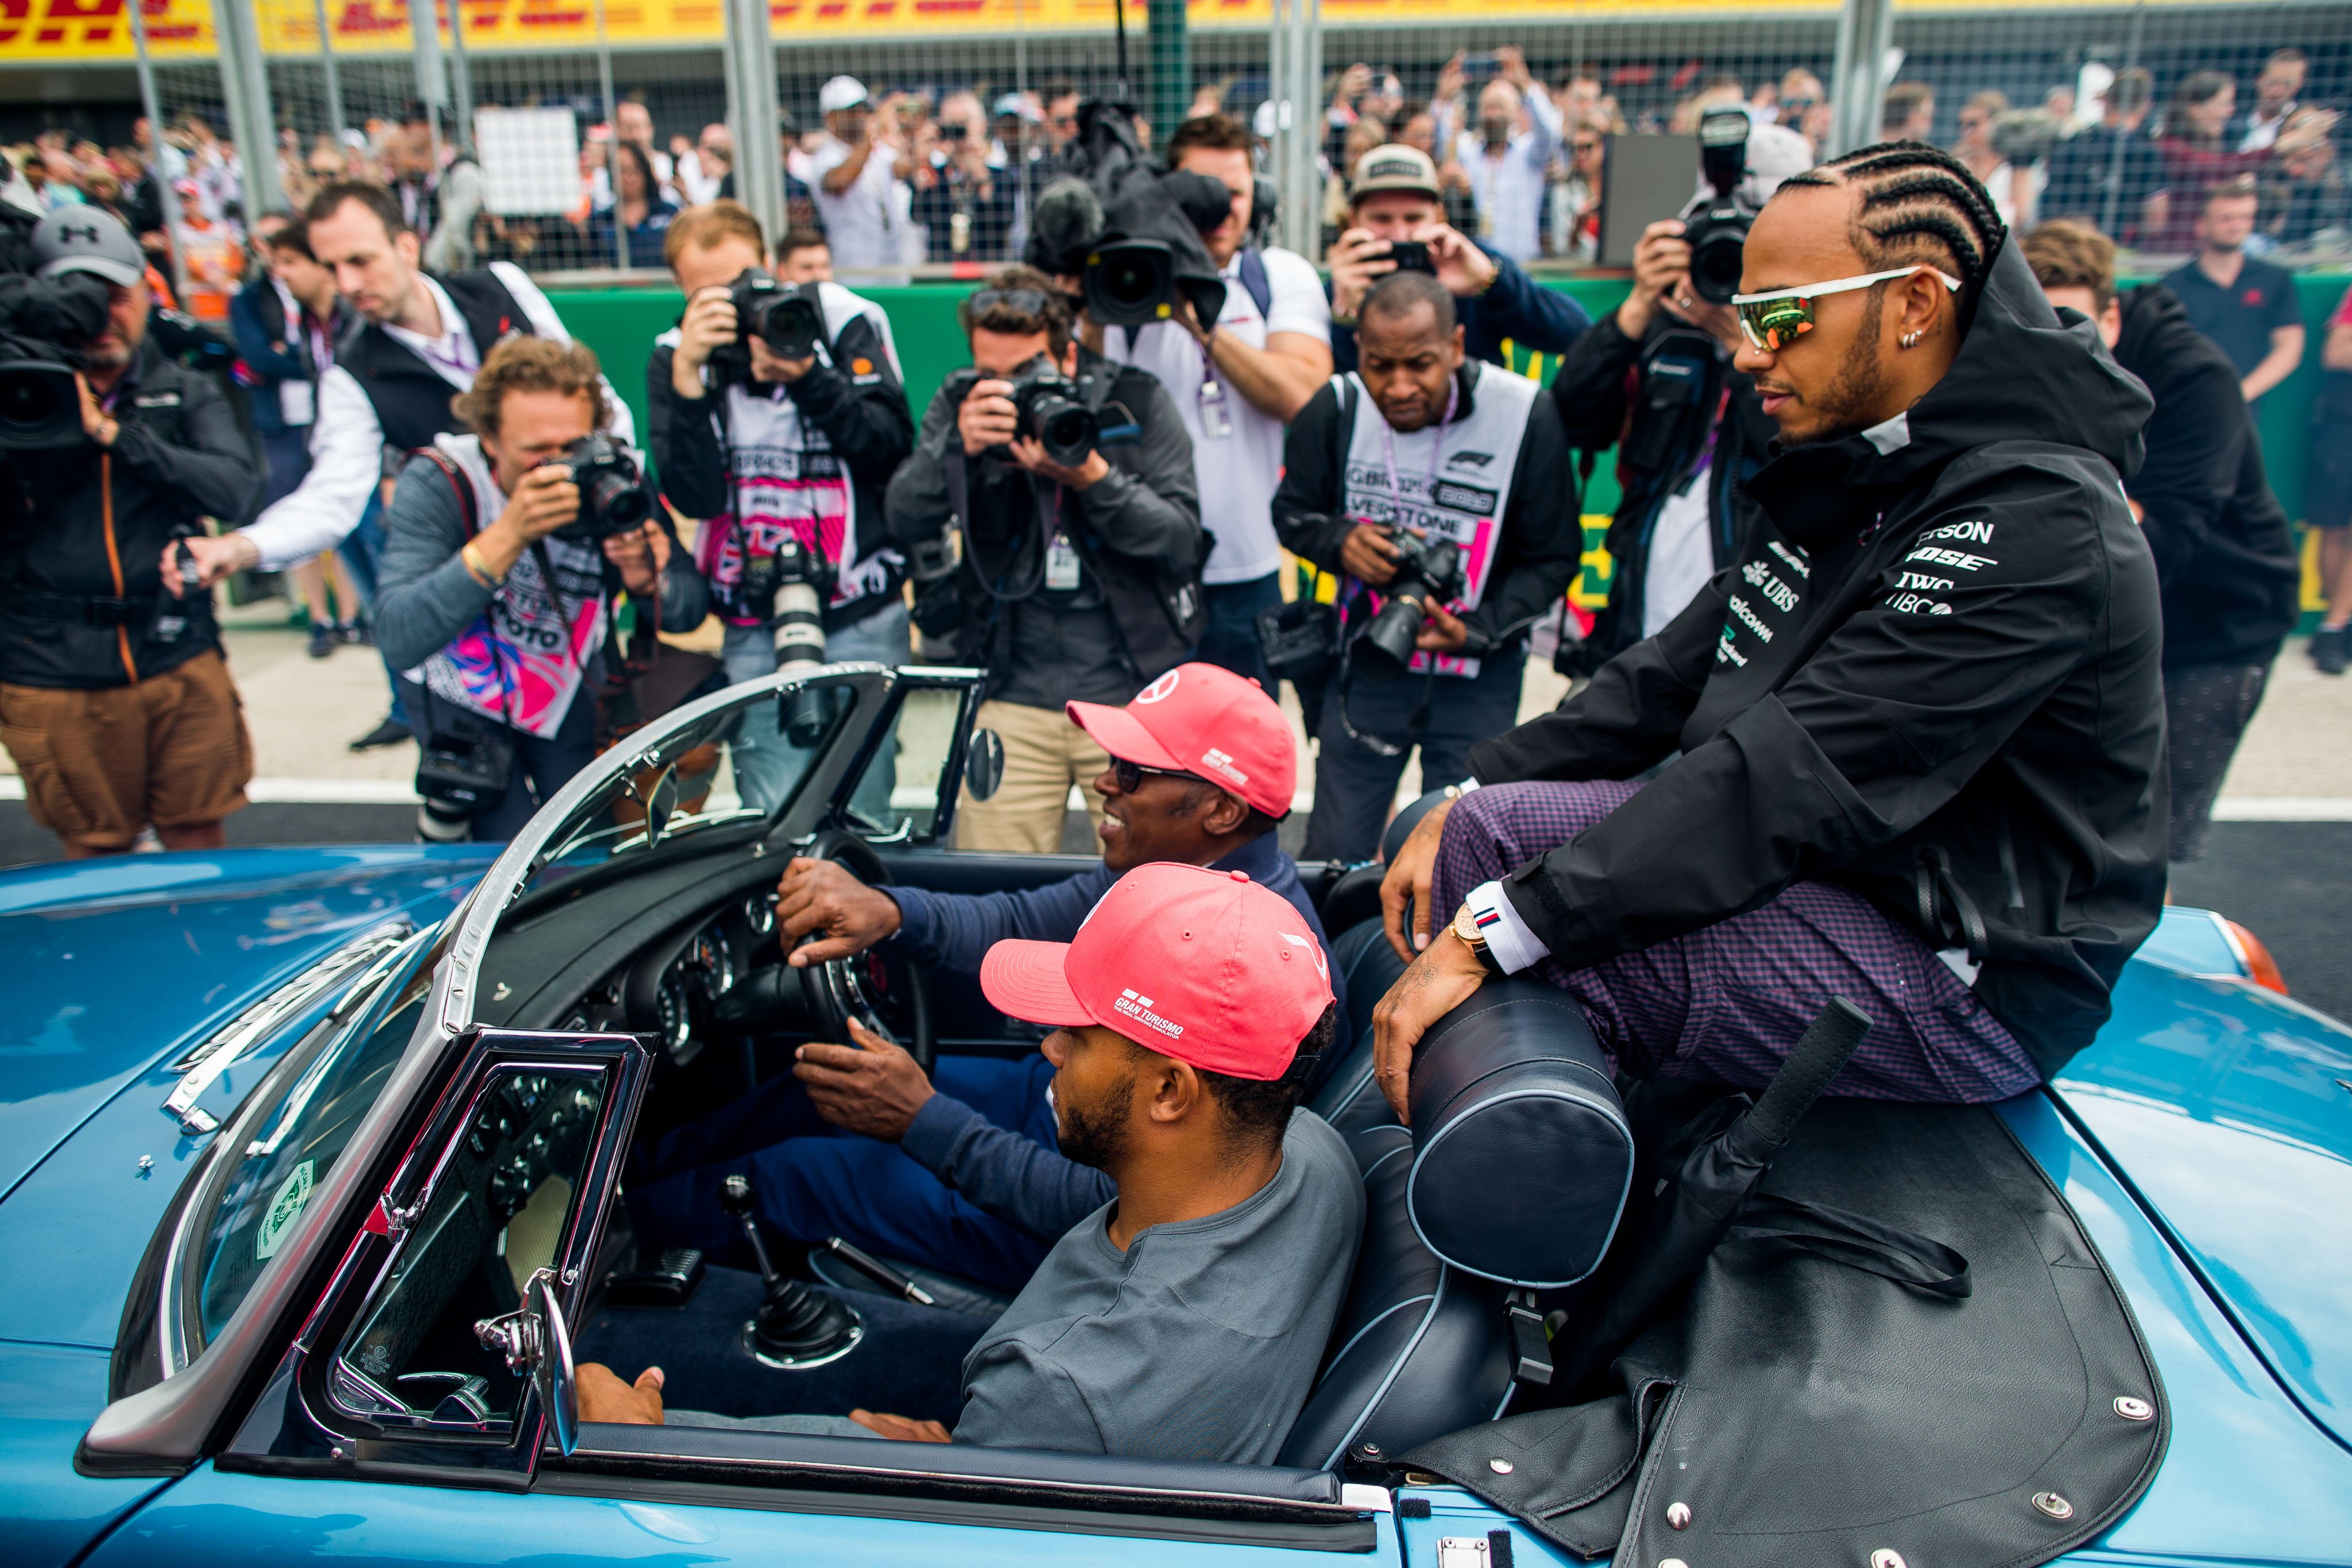  Lewis Hamilton with his brother, Nick, and father, Anthony, during the F1 Grand Prix of Great Britain at Silverstone on July 14, 2019, in Northampton, England. | Source: Getty Images